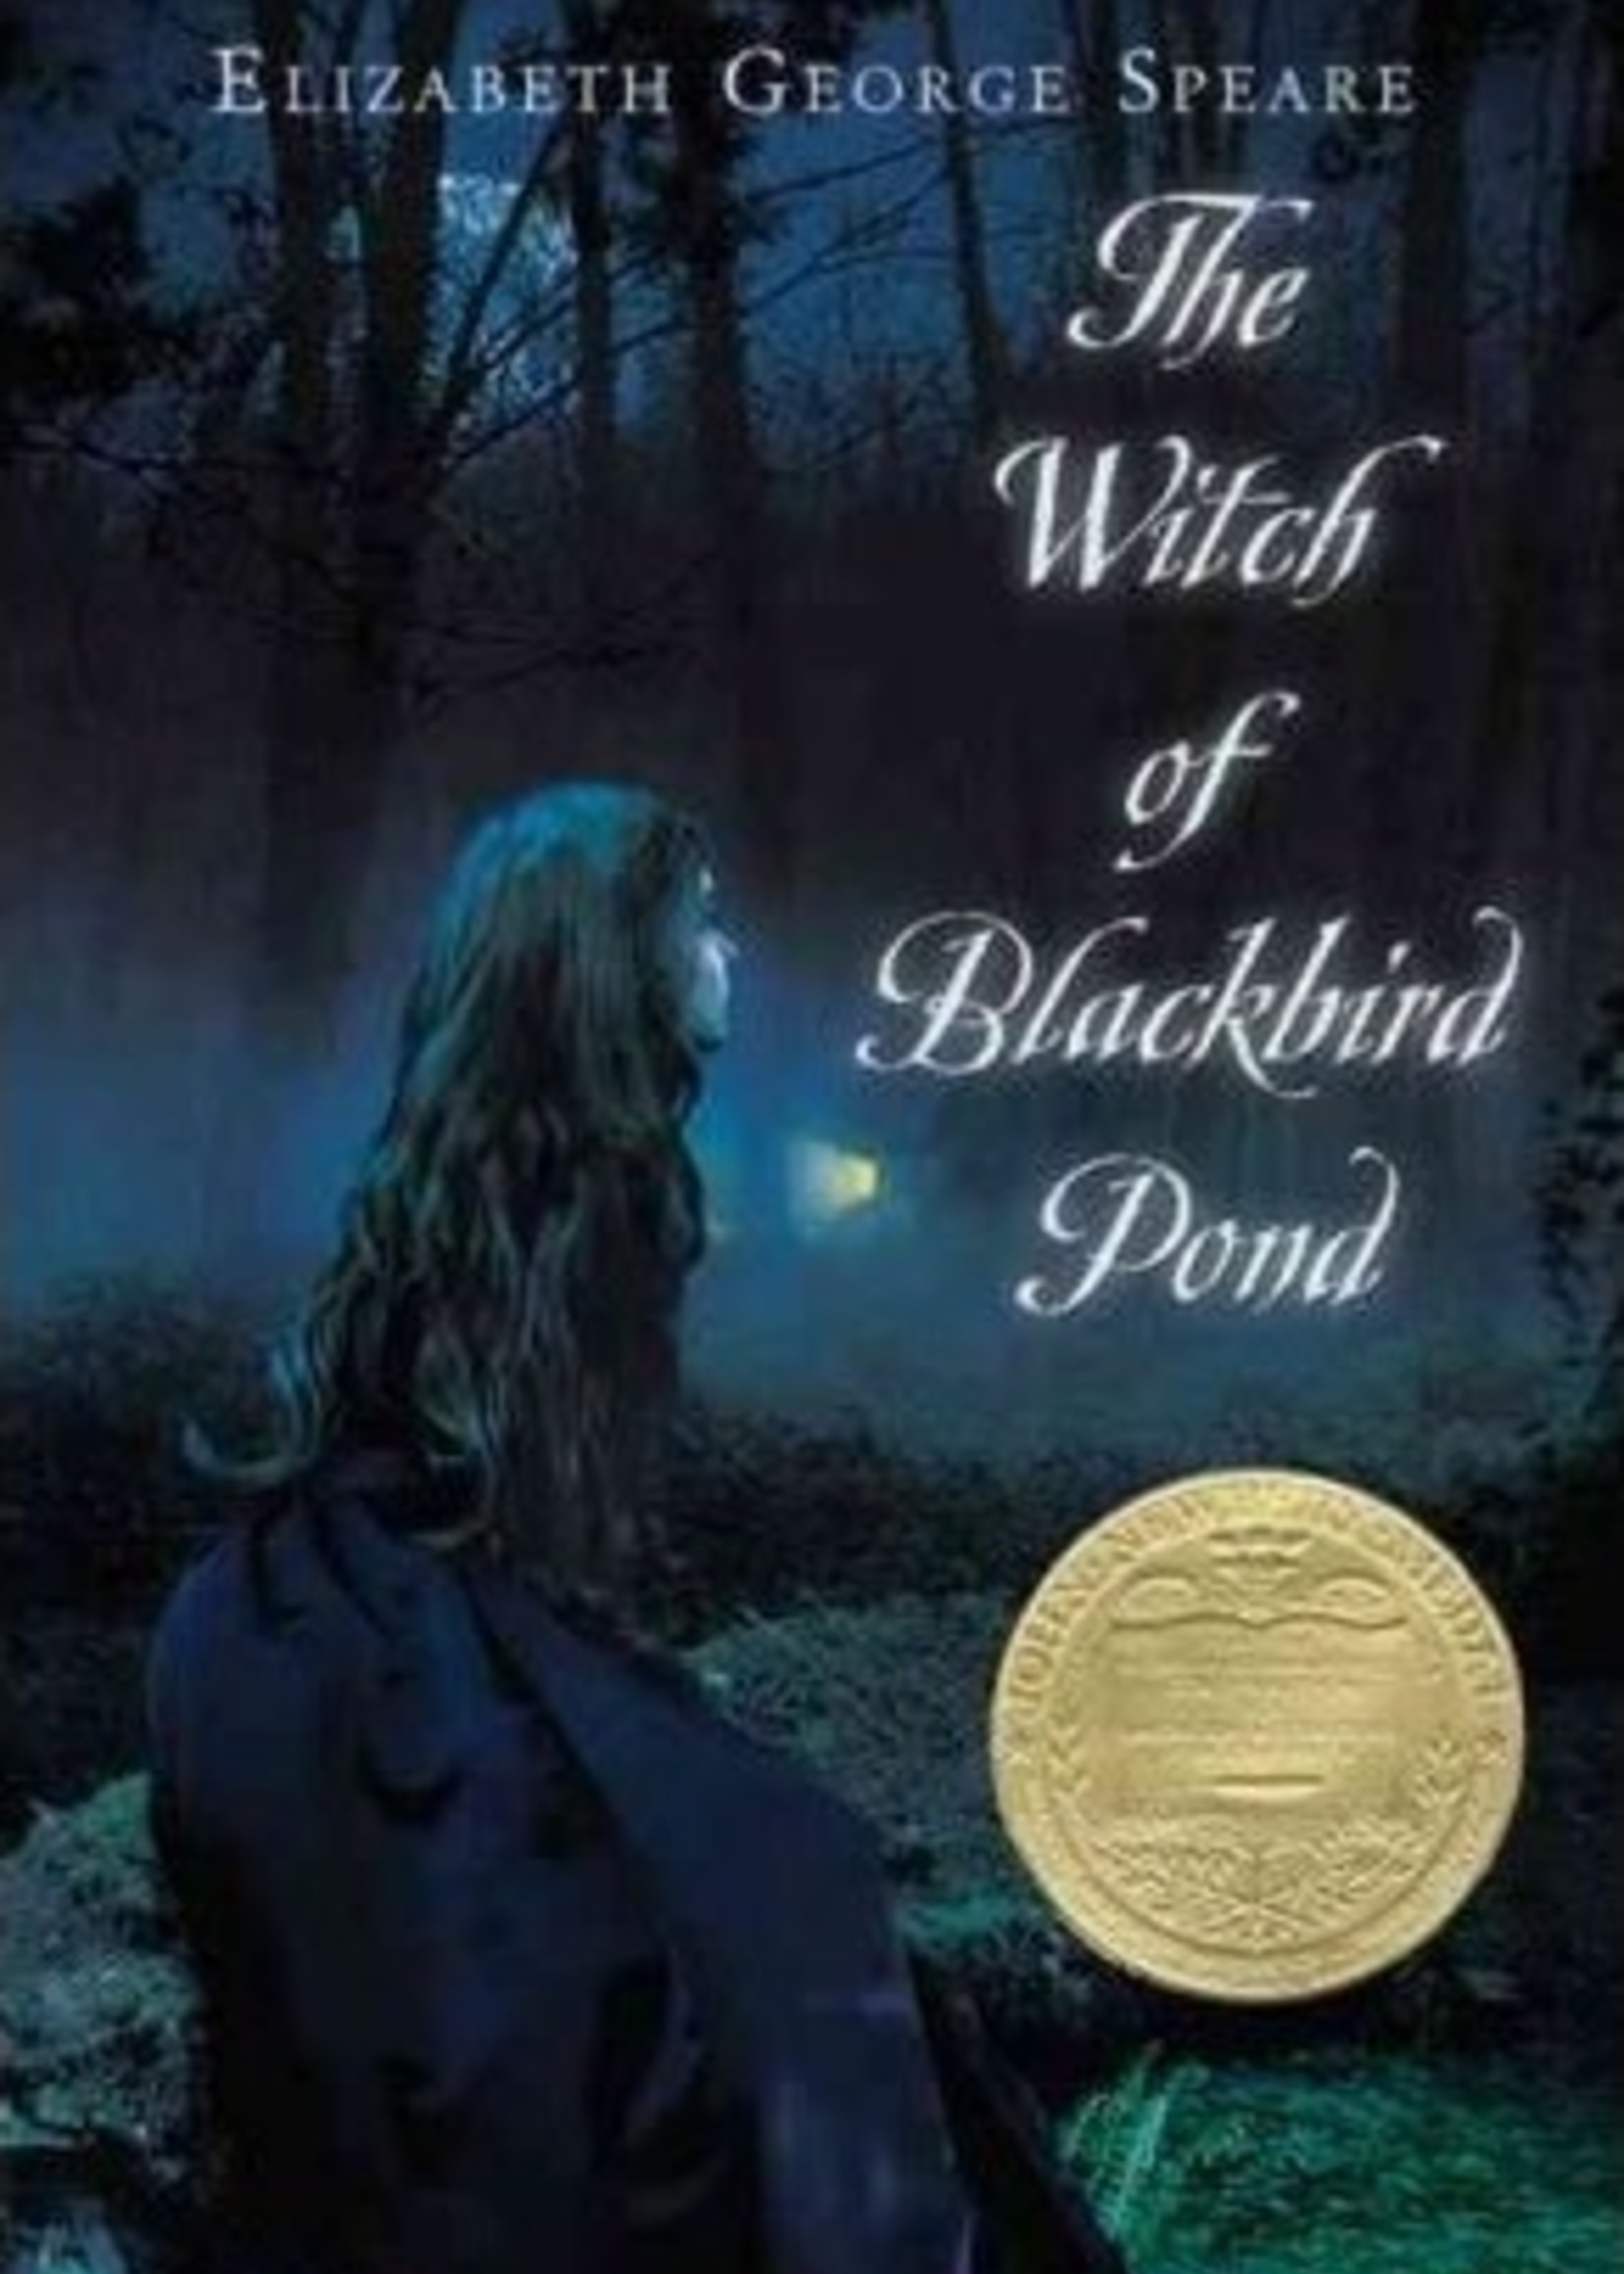 The Witch of Blackbird Pond by Elizabeth George Speare